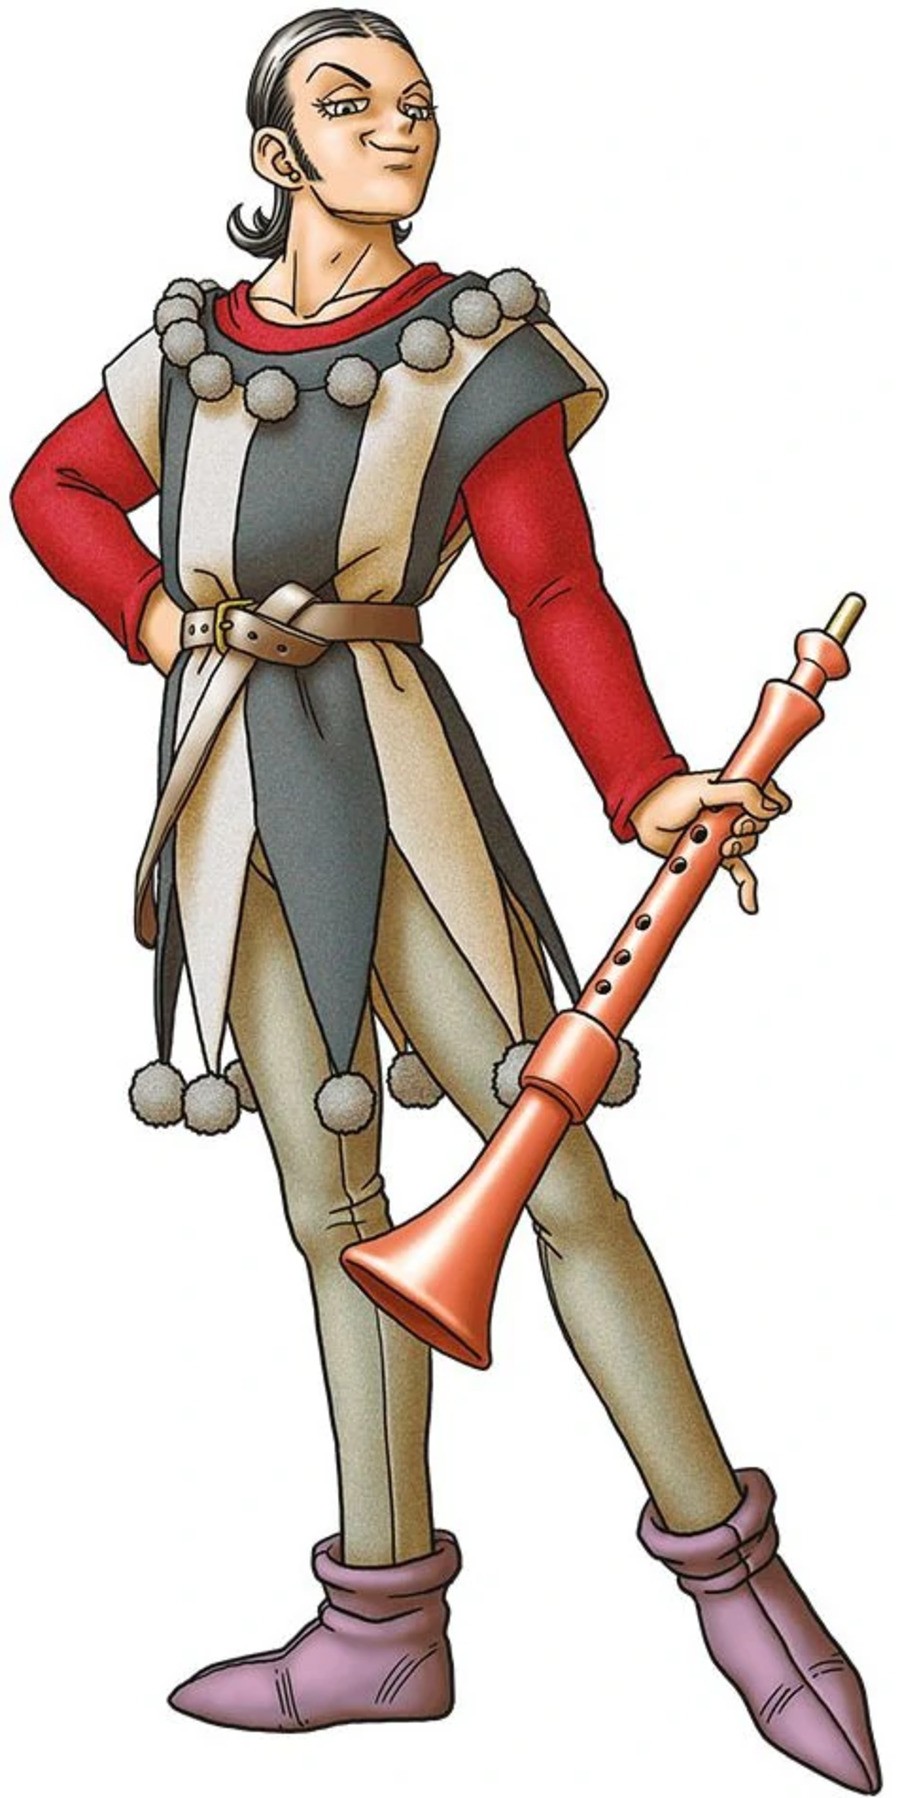 Who is this character from Dragon Quest XI (pictured)?